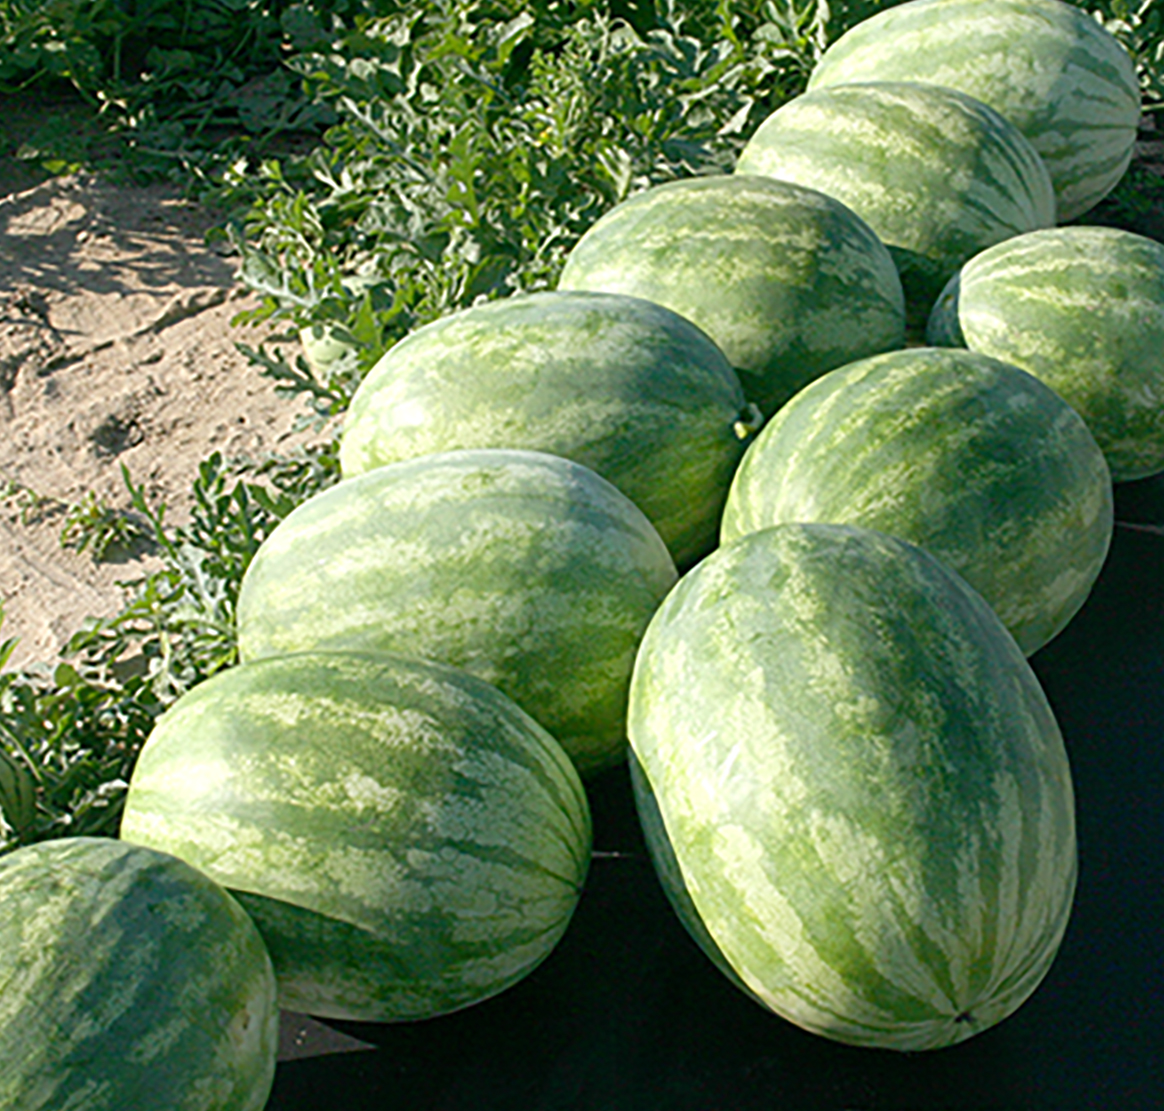 Watermelons in a pile during harvest on the UGA Tifton Campus.